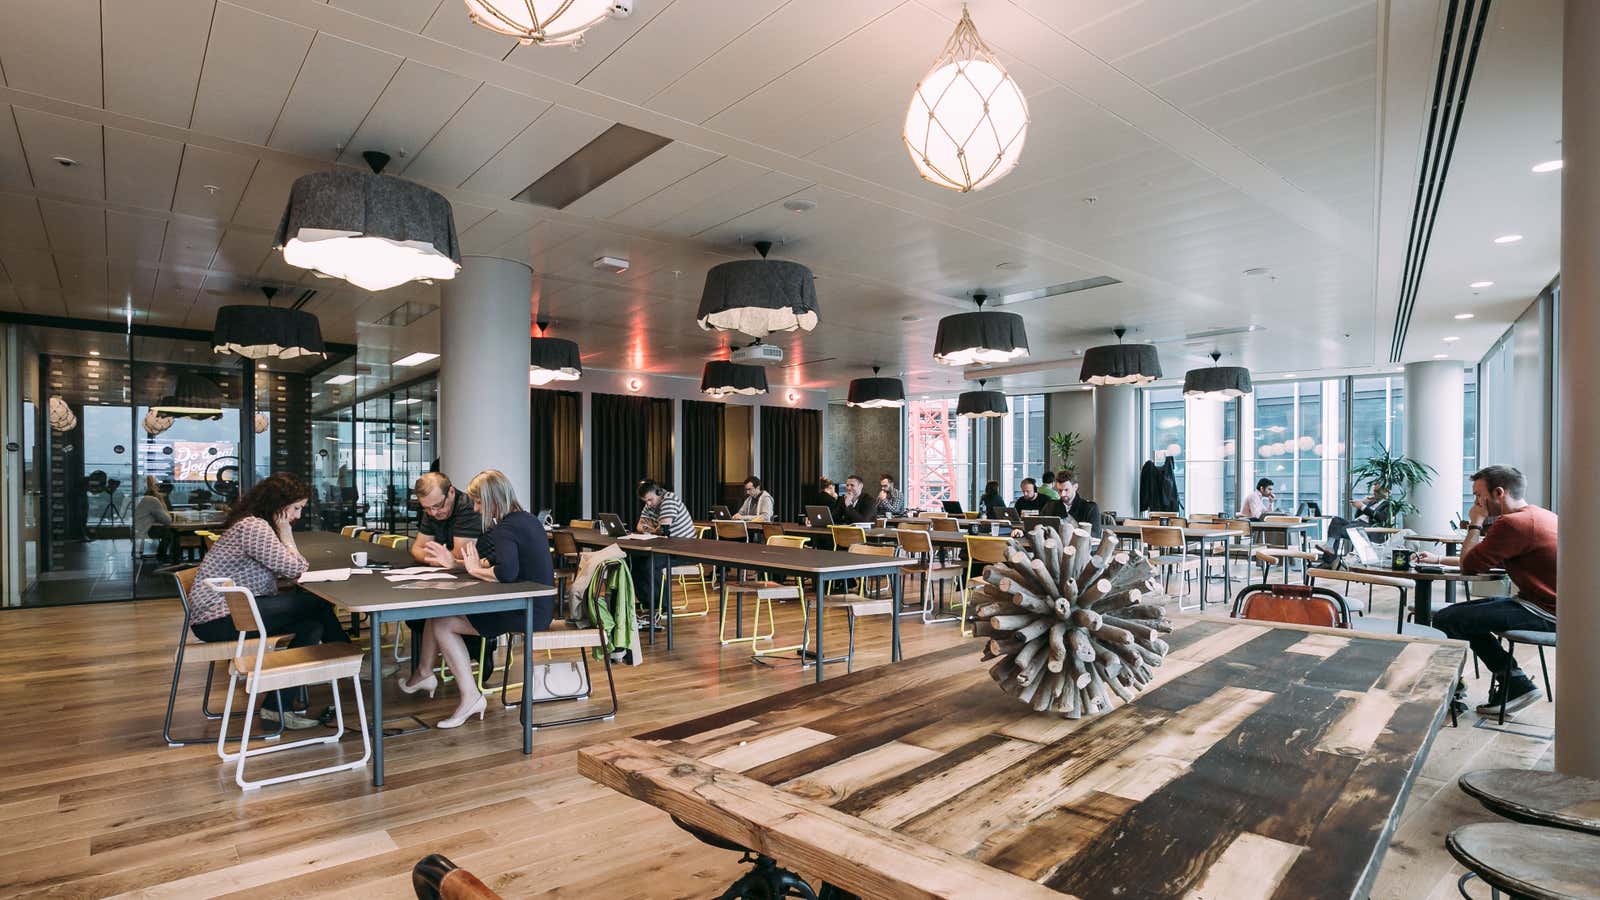 90% of WeWork’s inventory is private offices.